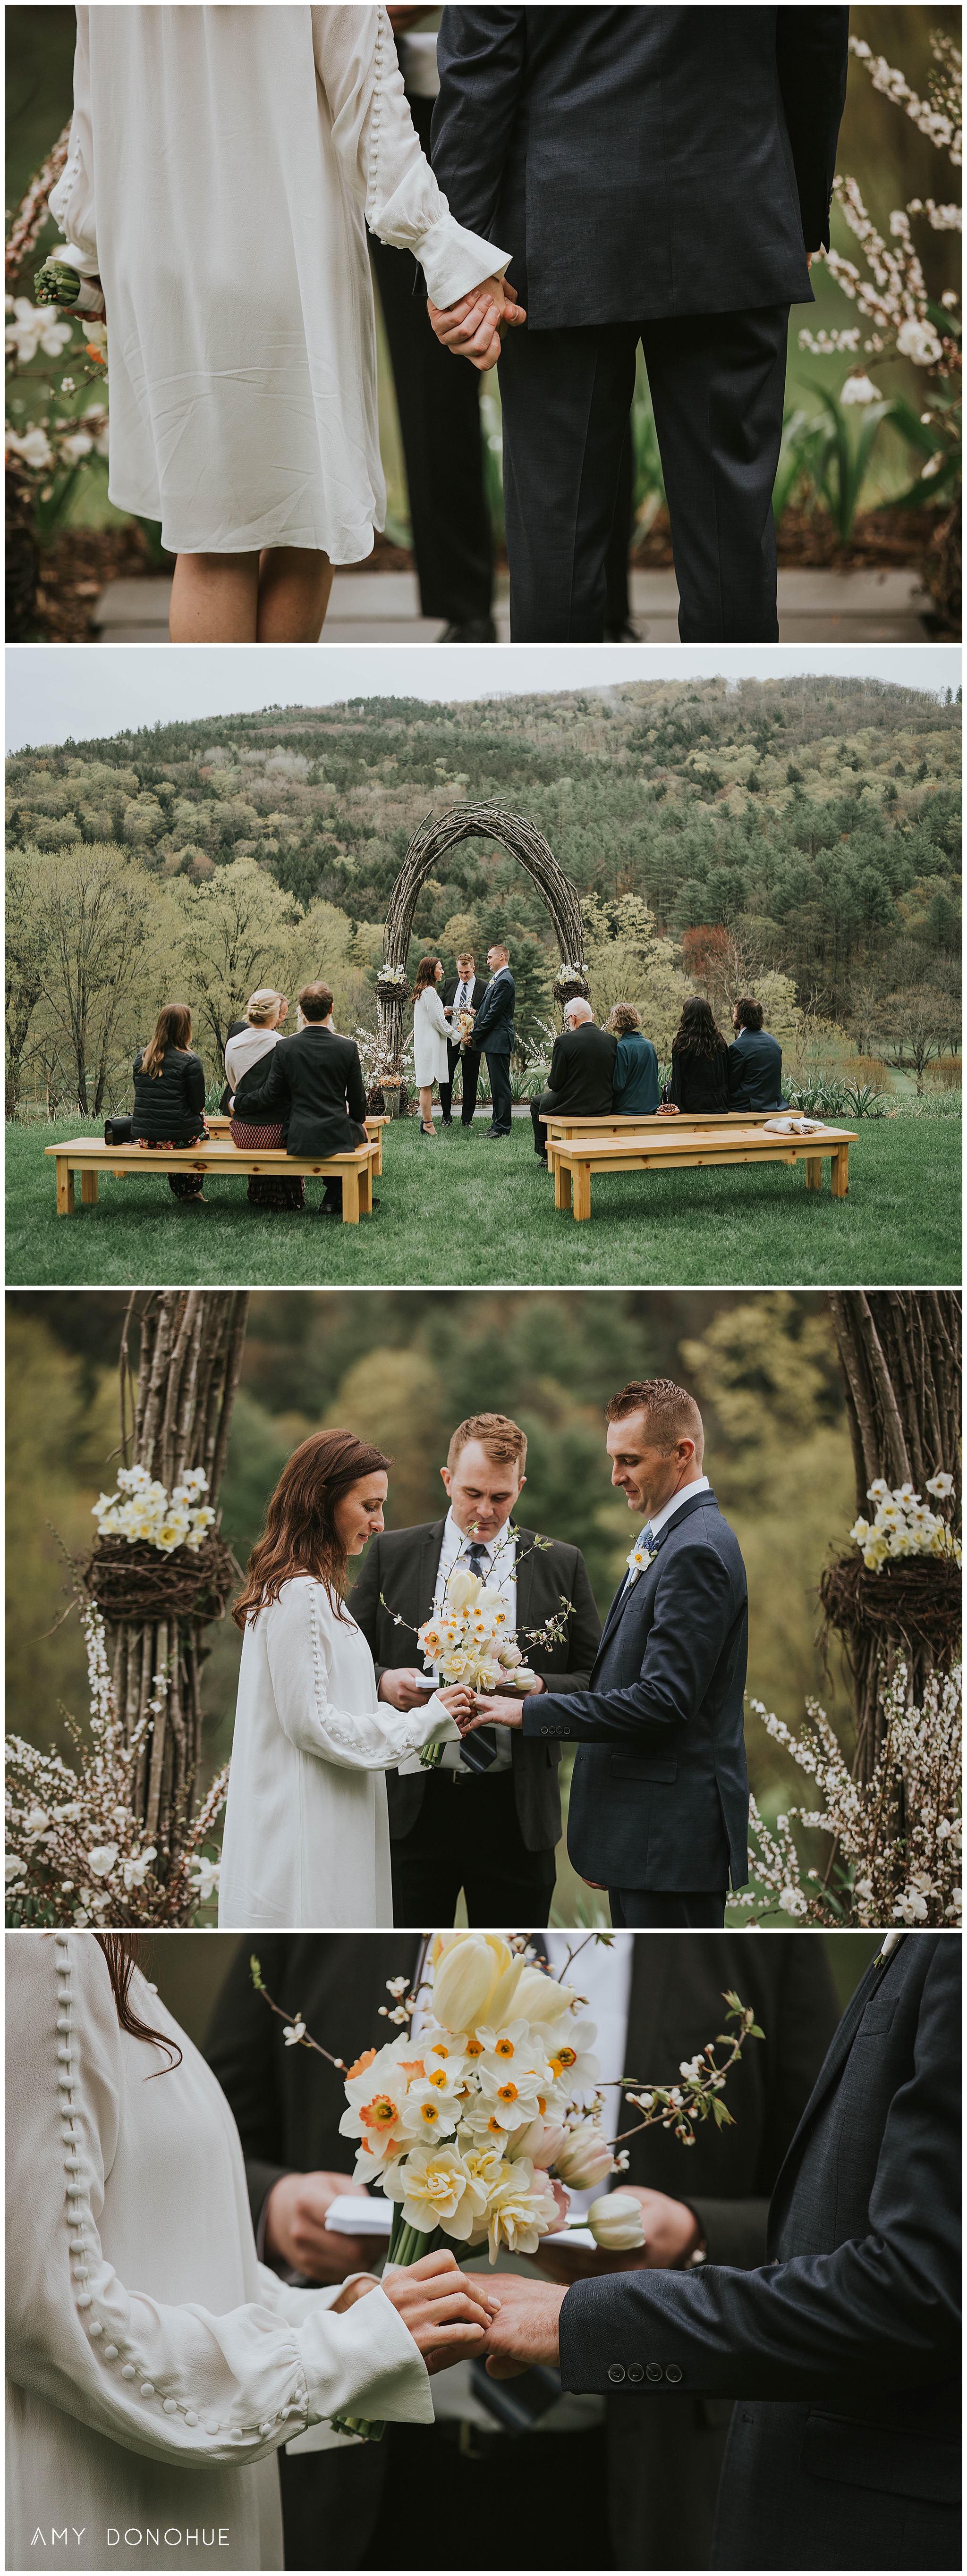 Intimate elopement ceremony at Kelly Way Gardens at the Woodstock Inn and Resort in Woodstock, Vermont